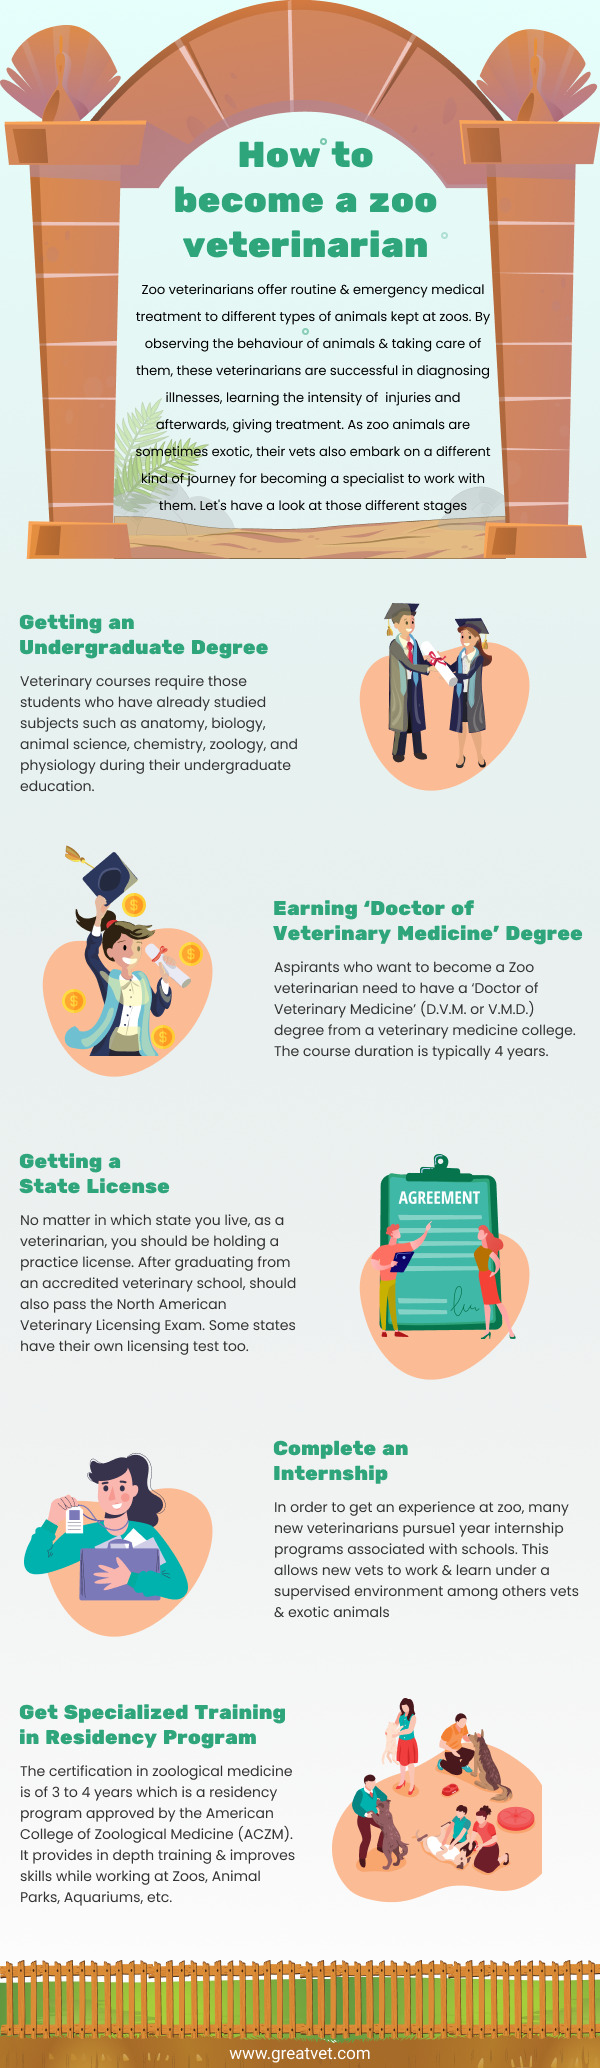 How-to-Become-a-Zoo-Veterinarian - Infographic - GreatVet